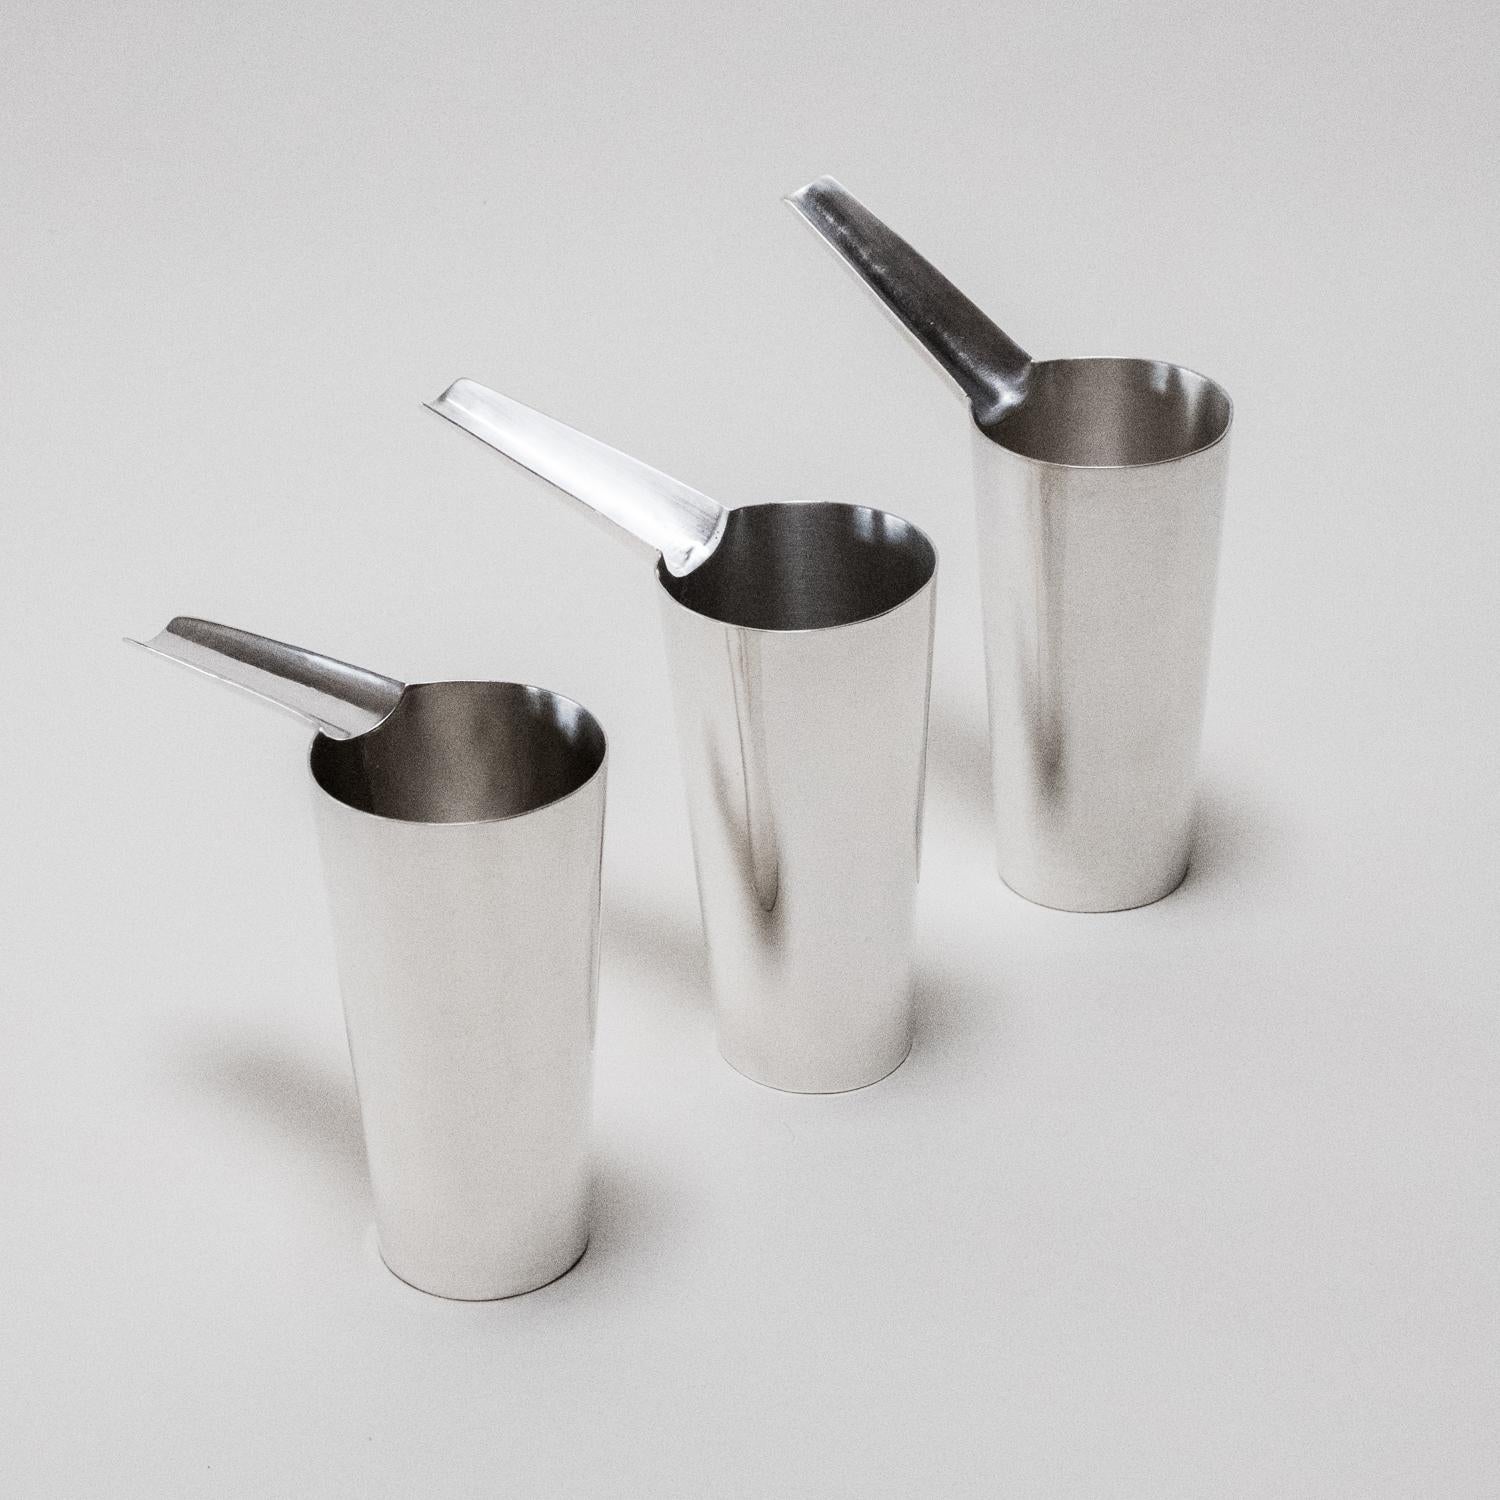 Minimalist Sake Tampo, Set of 3 Silver Cups by UMÉ Studio For Sale